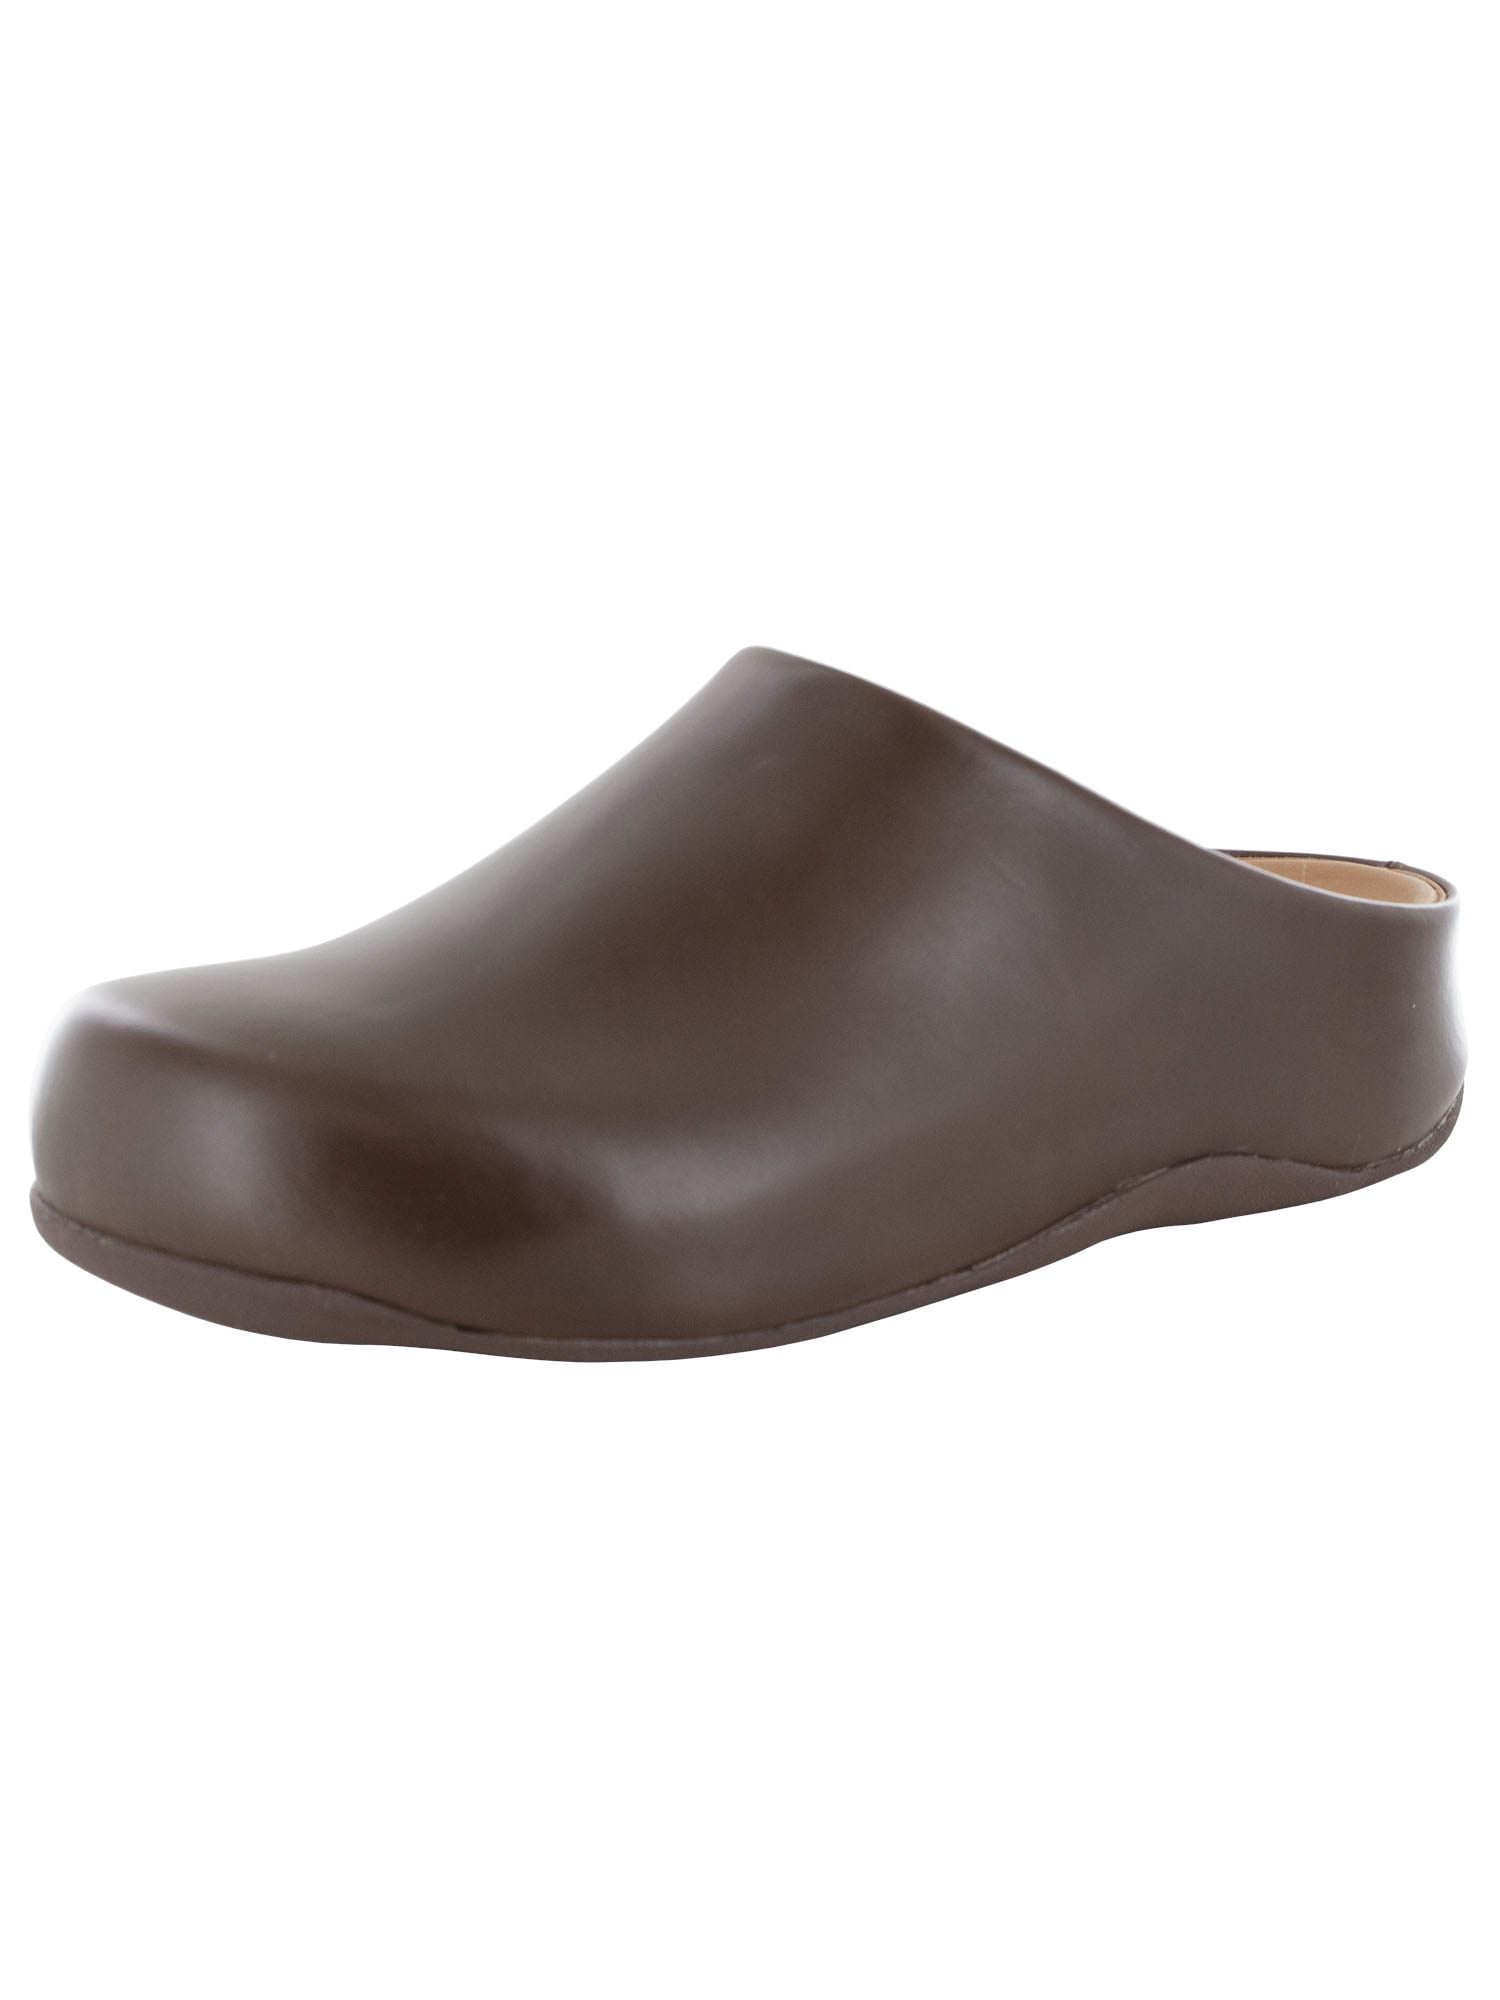 fitflop women's shuv leather clog